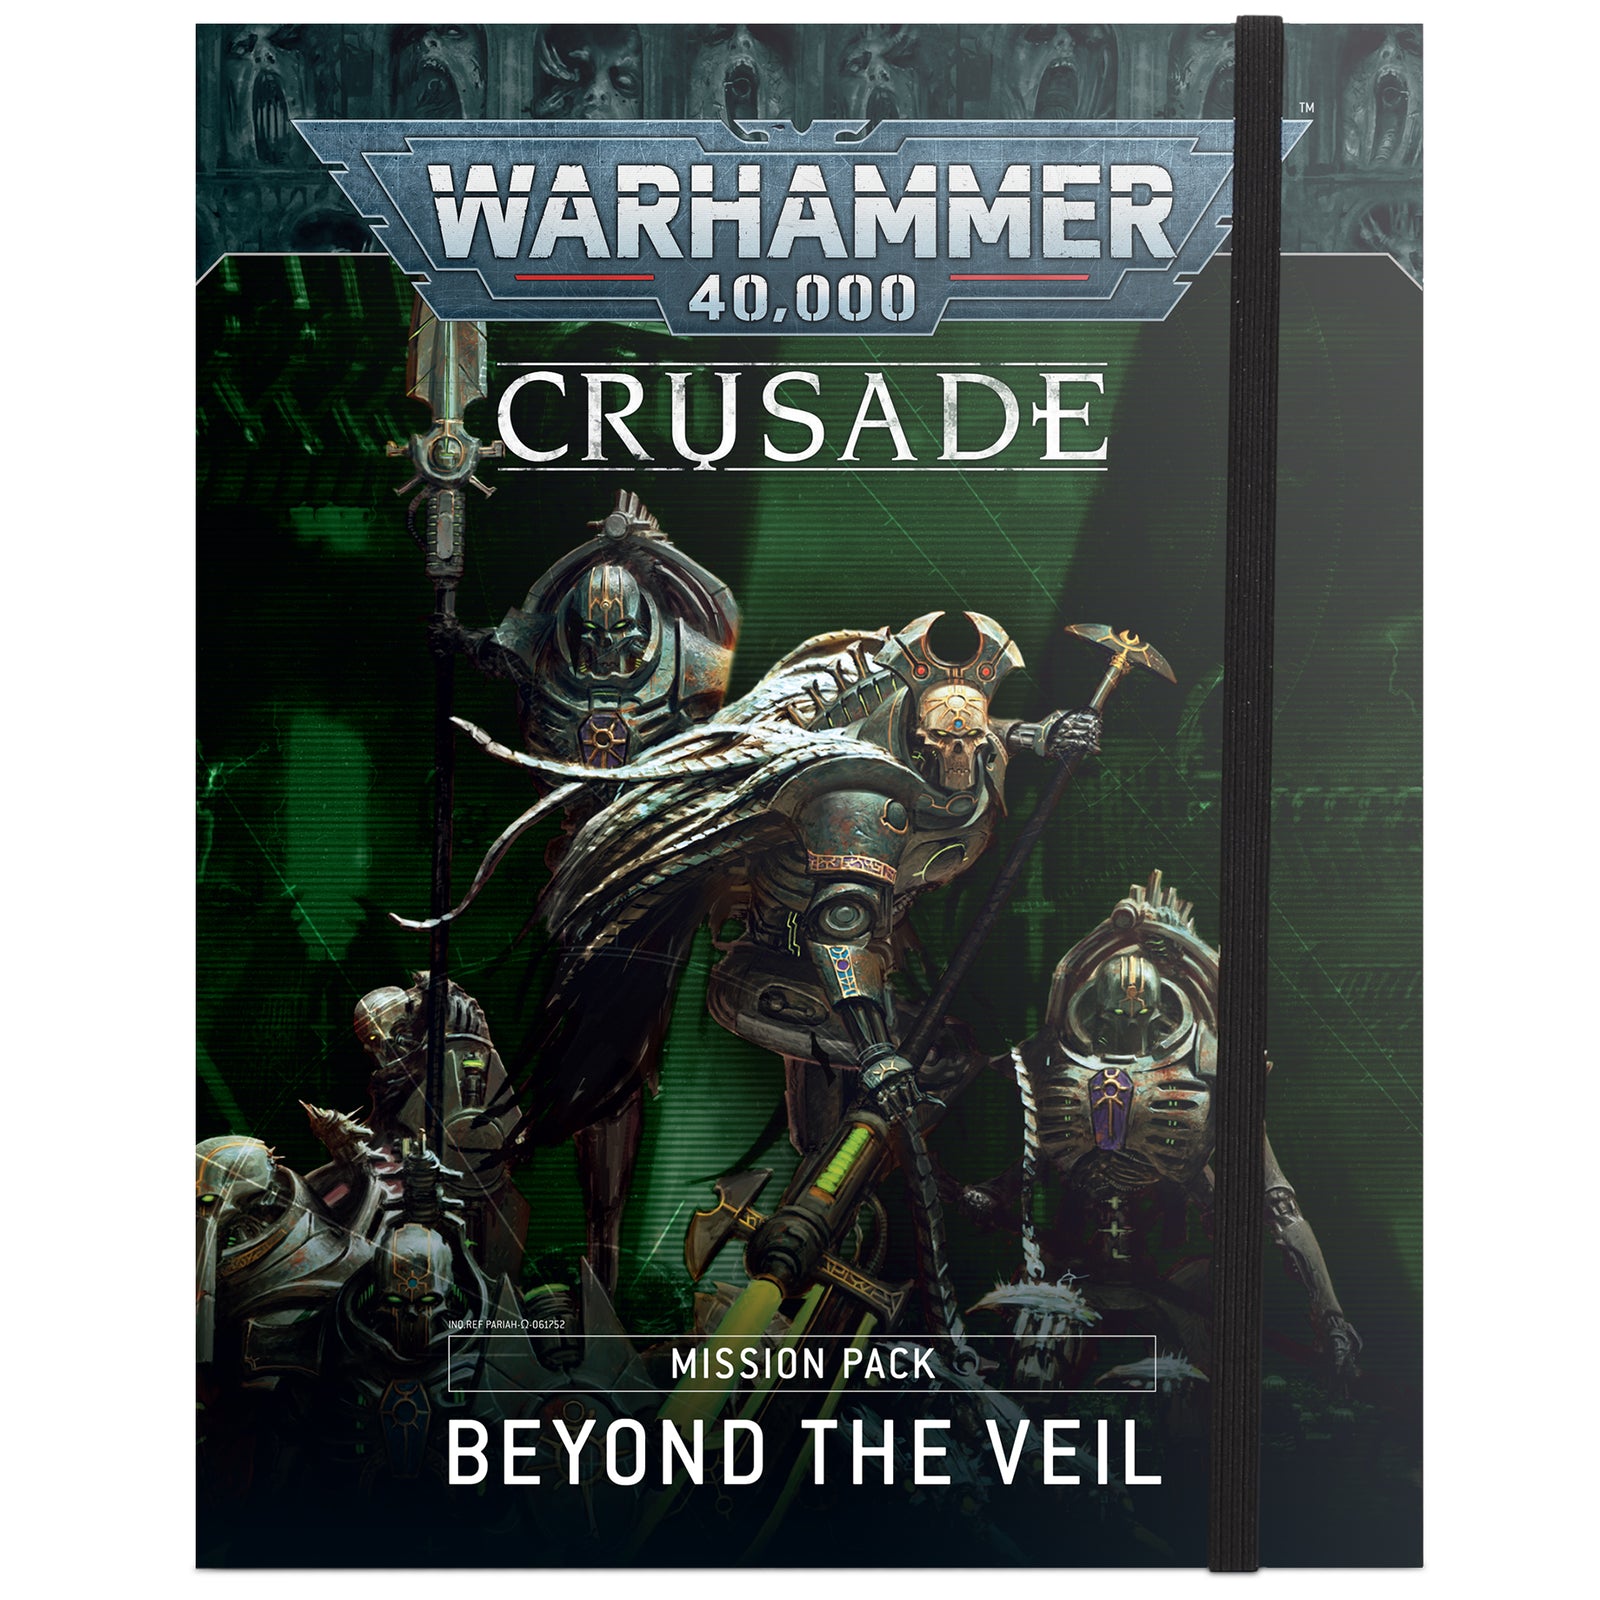 cover art for Warhammer 40K Crusade mission pack Beyond the Veil